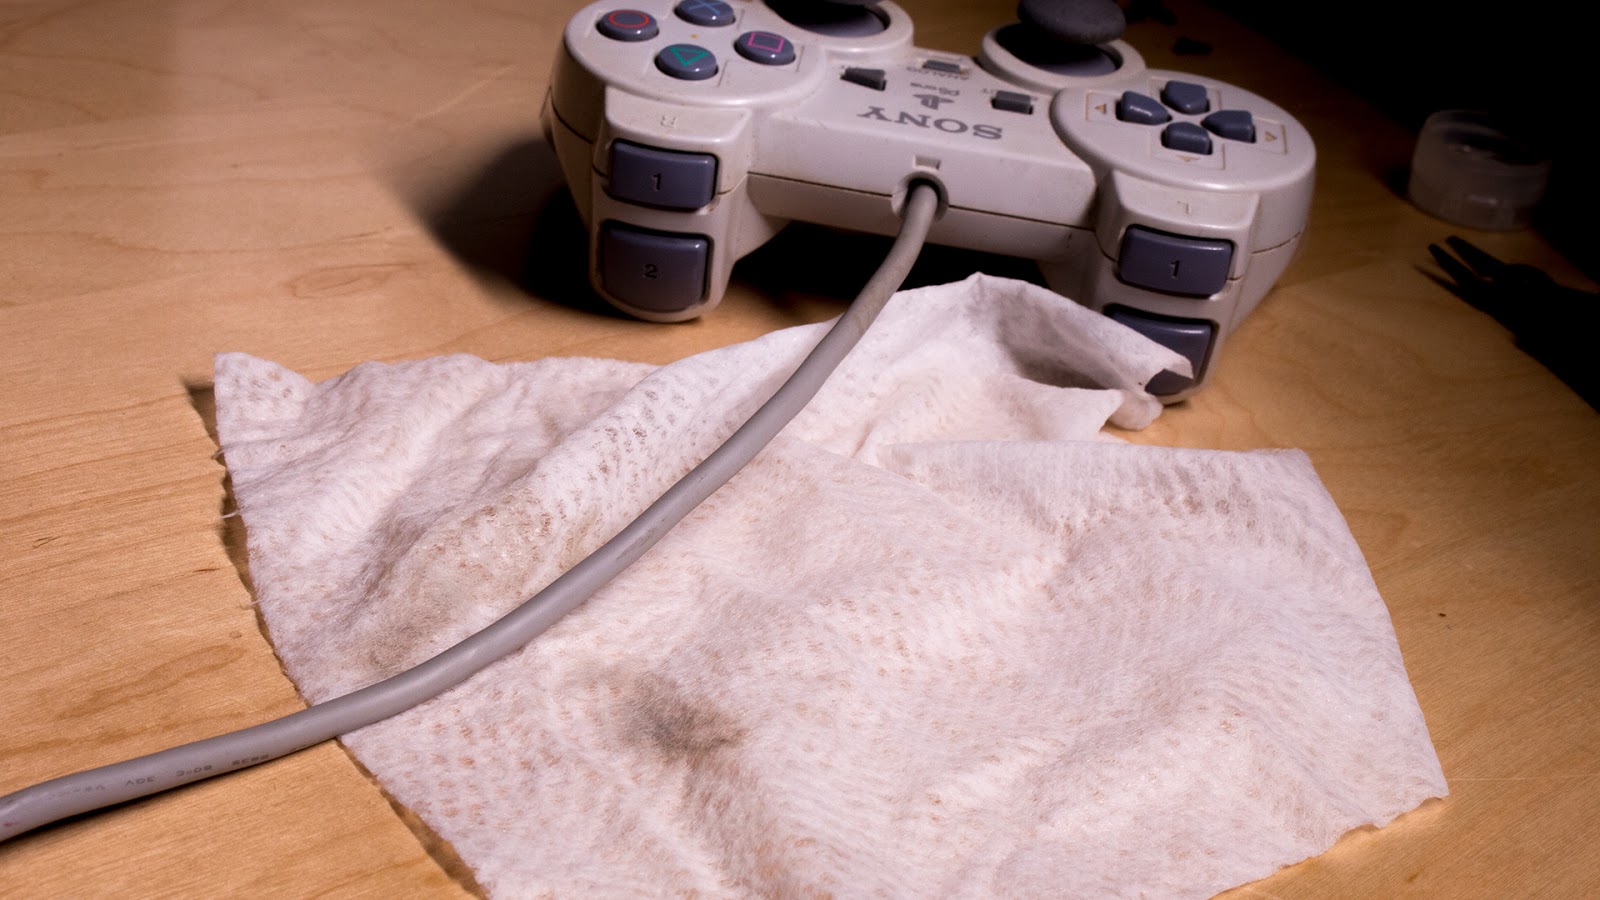 How To Clean Your Video Game Consoles